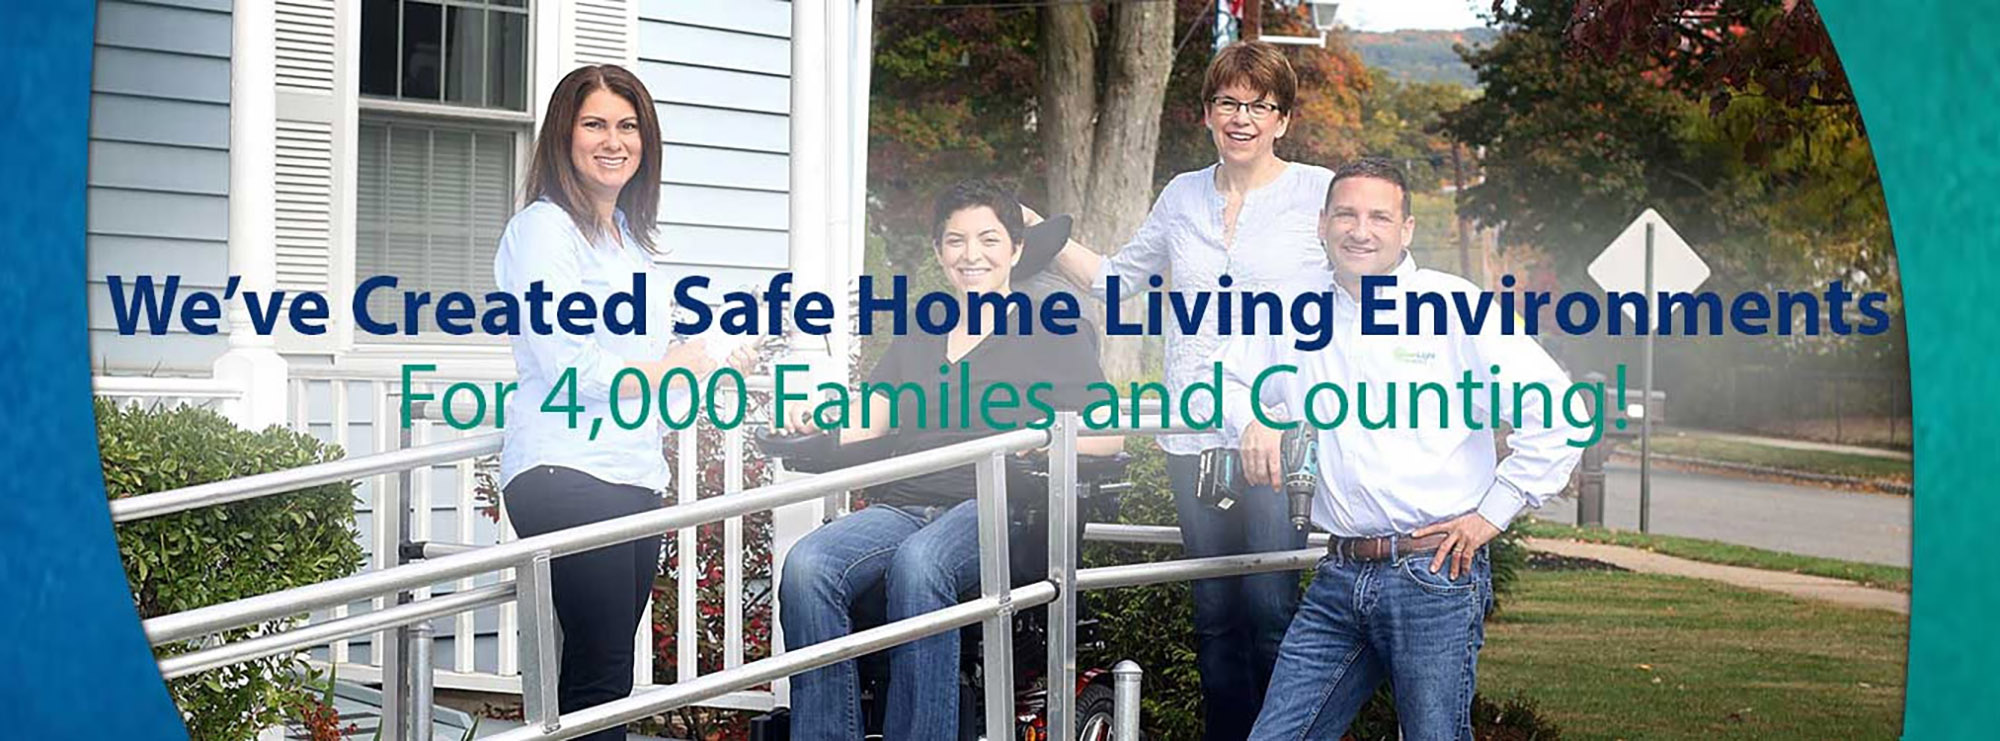 We have created safe home living environments for 1,000s of families